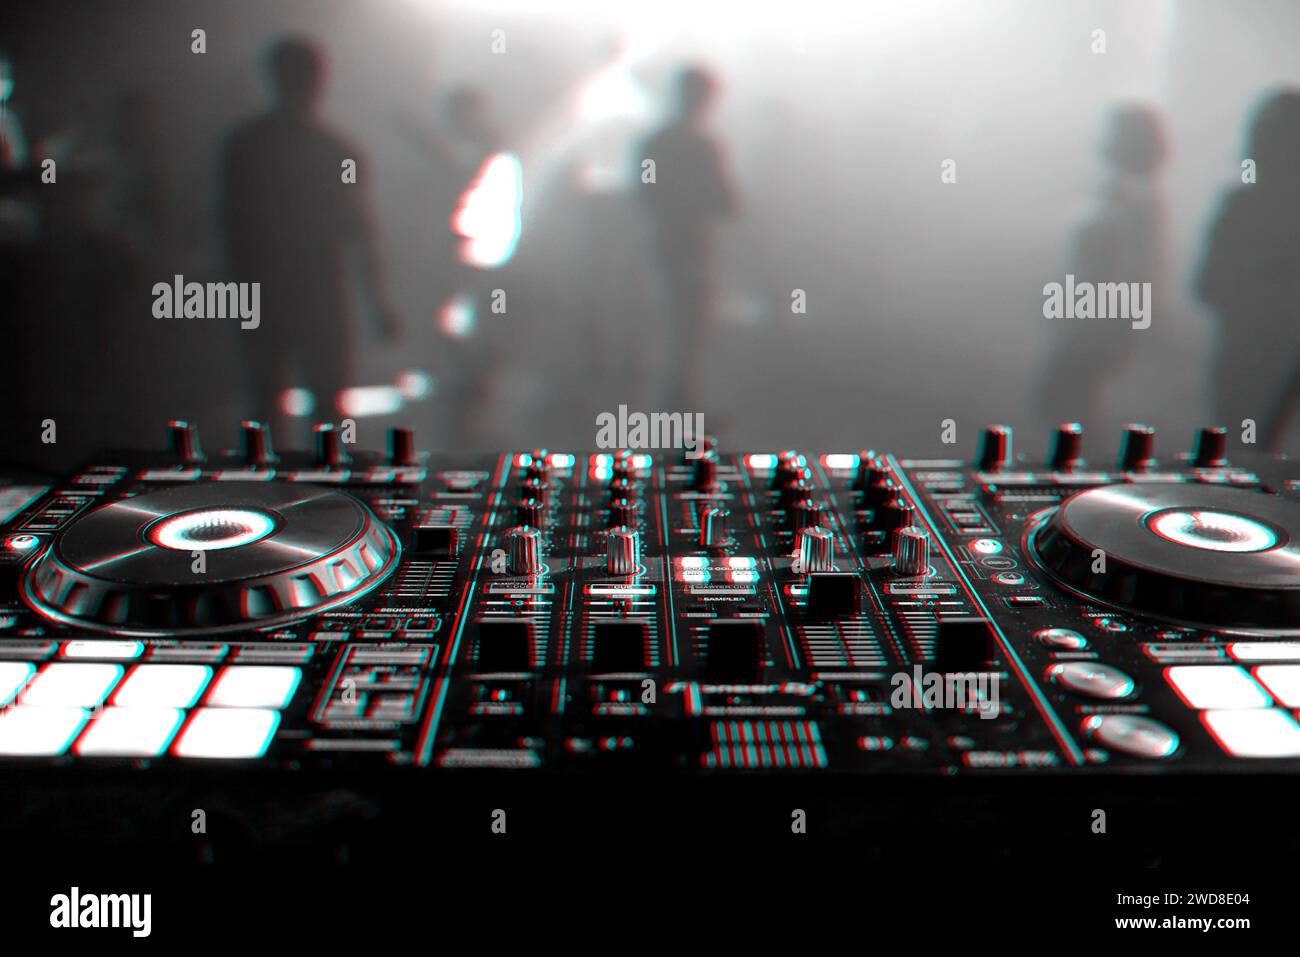 DJ mixer on the table background the night club and dancing people. Black and white photo with glitch effect and small grain Stock Photo